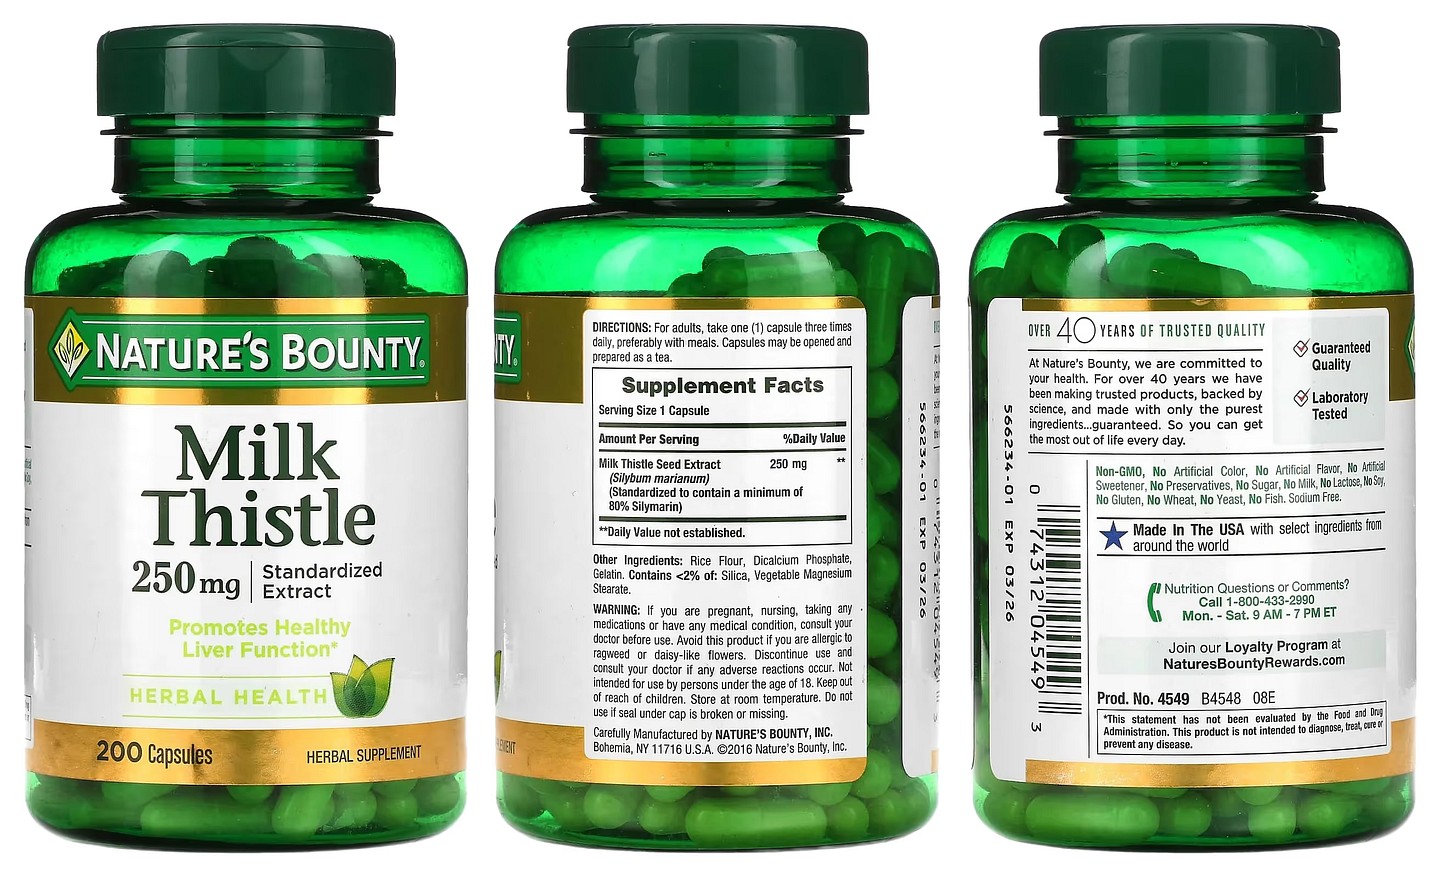 Nature's Bounty, Milk Thistle packaging